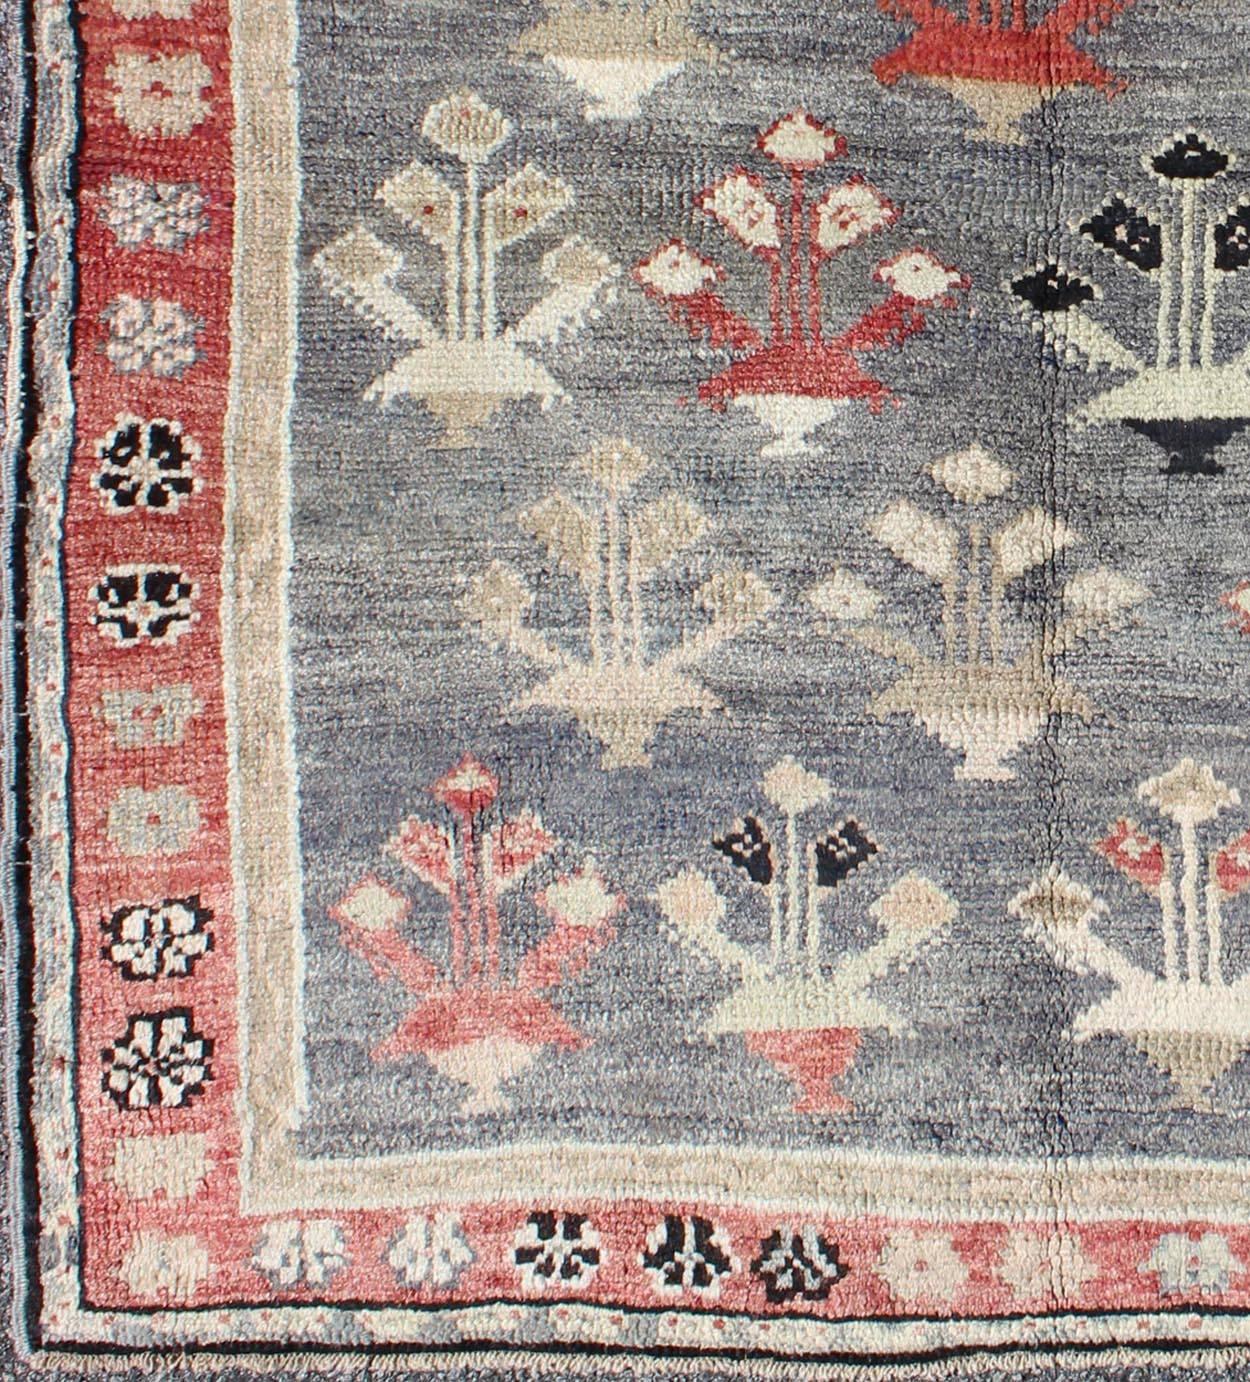 Vintage Turkish Oushak rug in red, blue-gray, onyx, taupe and ivory, rug en-322, country of origin / type: Turkey / Oushak, circa 1940

This vintage Turkish Oushak carpet (circa mid-20th century) features an all-over pattern of small vase with